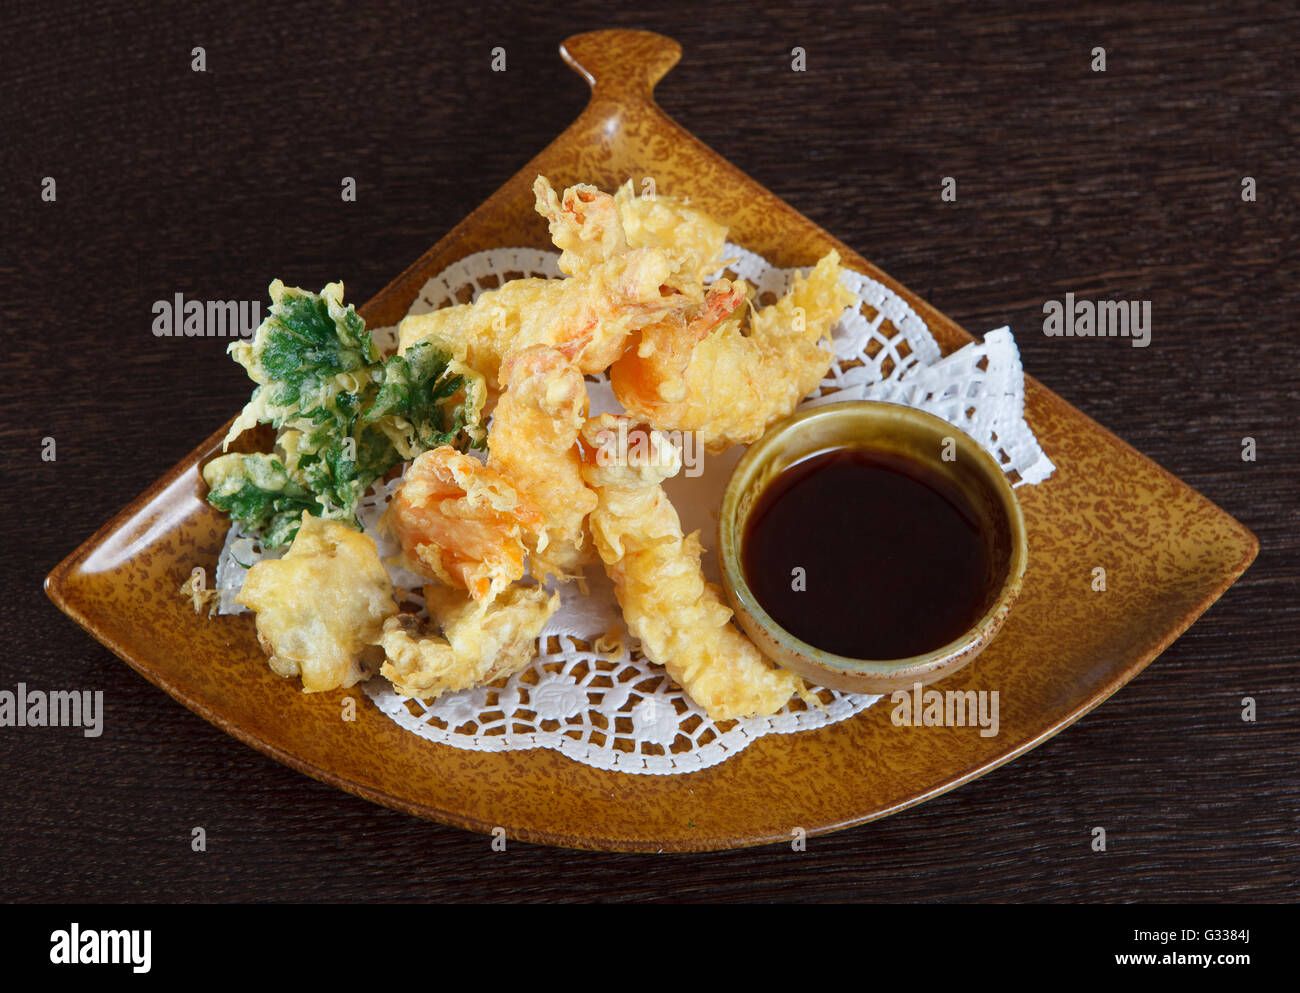 Tempura shrimps (deep fried shrimps) with soy sauce. Decorating dish of Japanese and Asian cuisine. Close up top view. Stock Photo